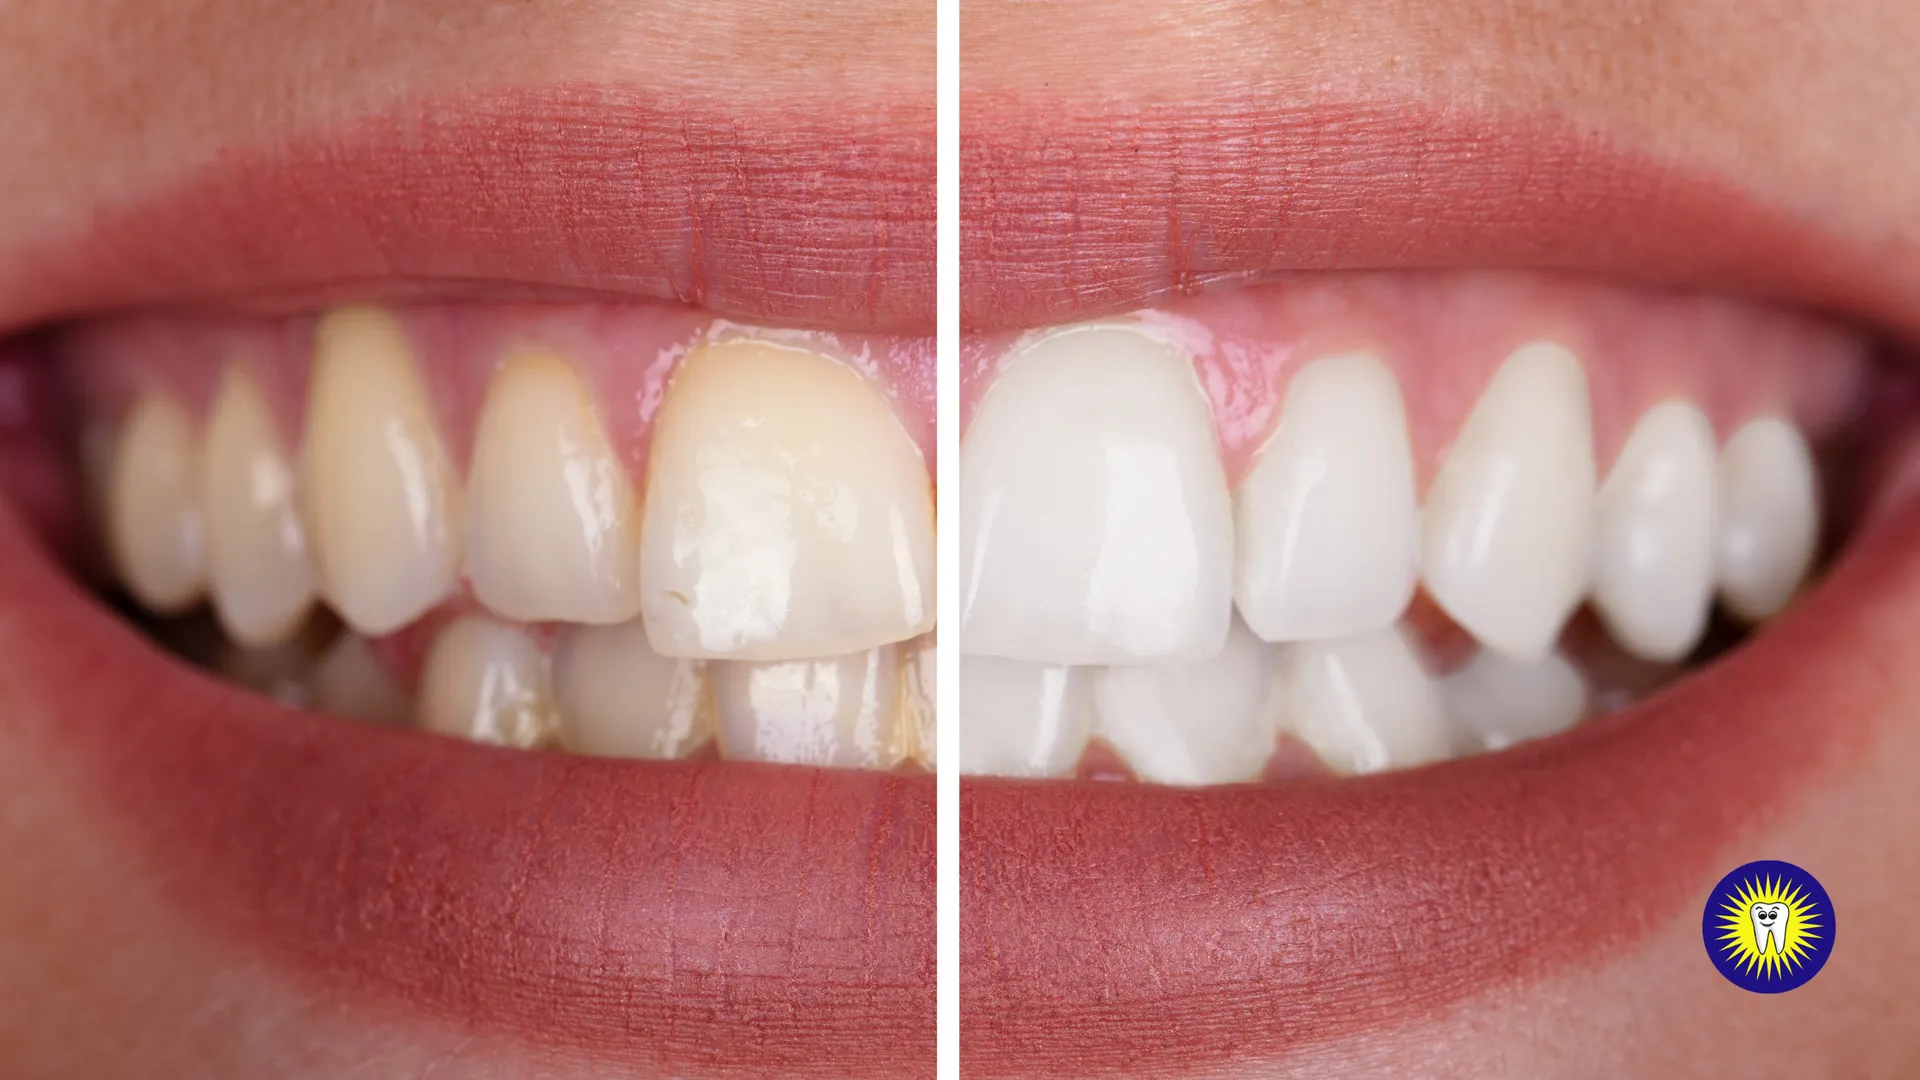 Teeth whitening services and solutions in Toronto